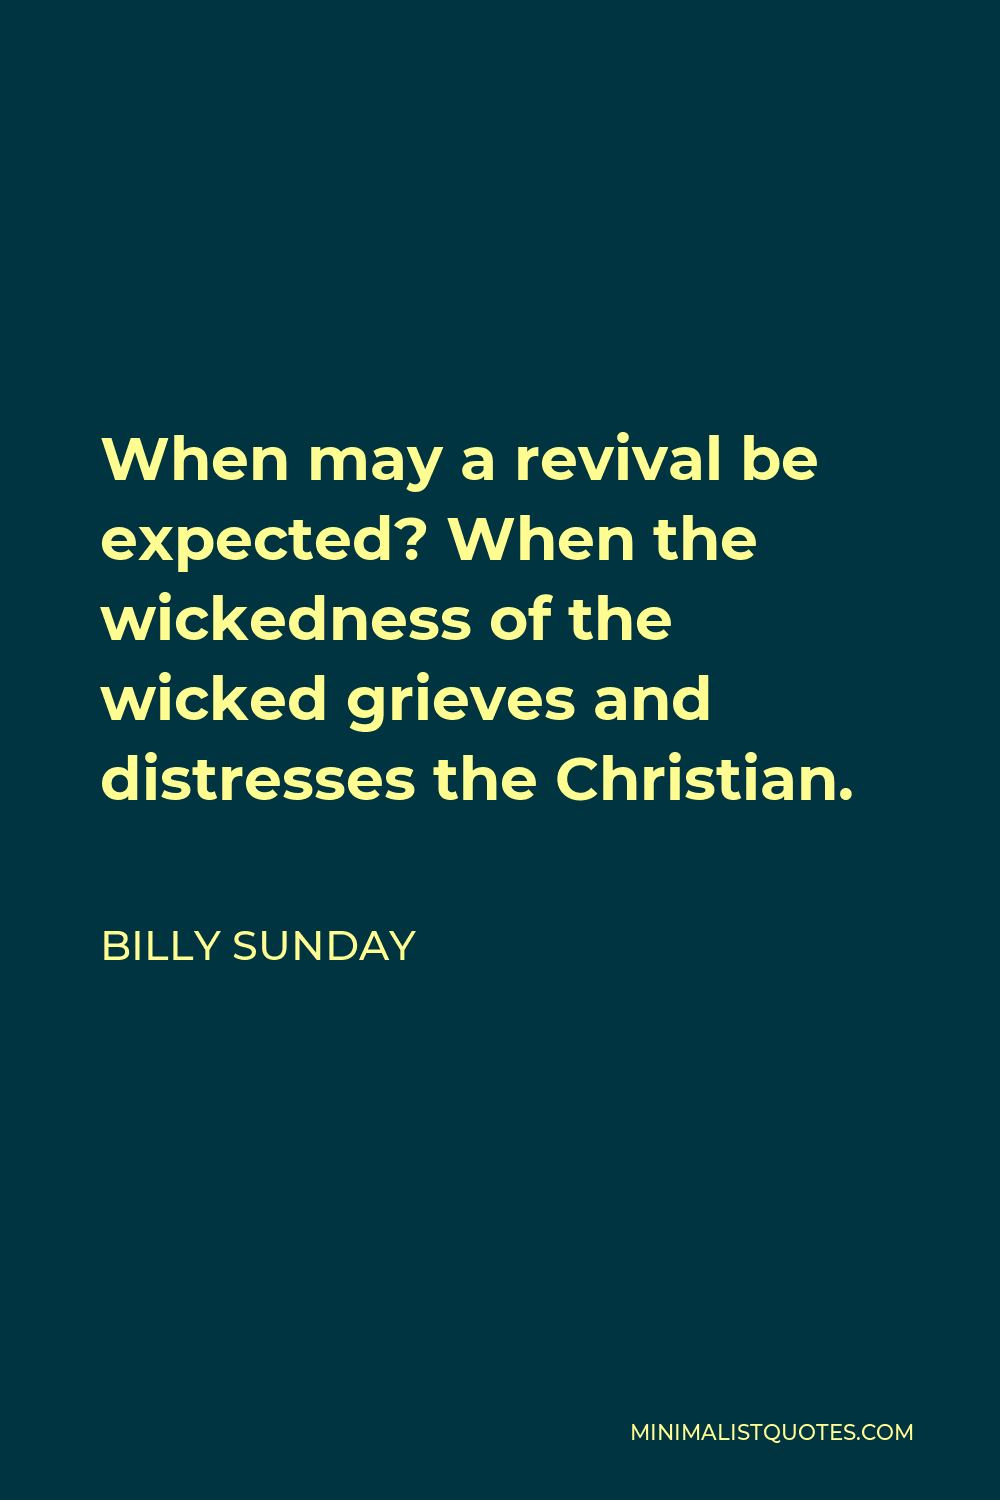 Billy Sunday Quote - When may a revival be expected? When the wickedness of the wicked grieves and distresses the Christian.